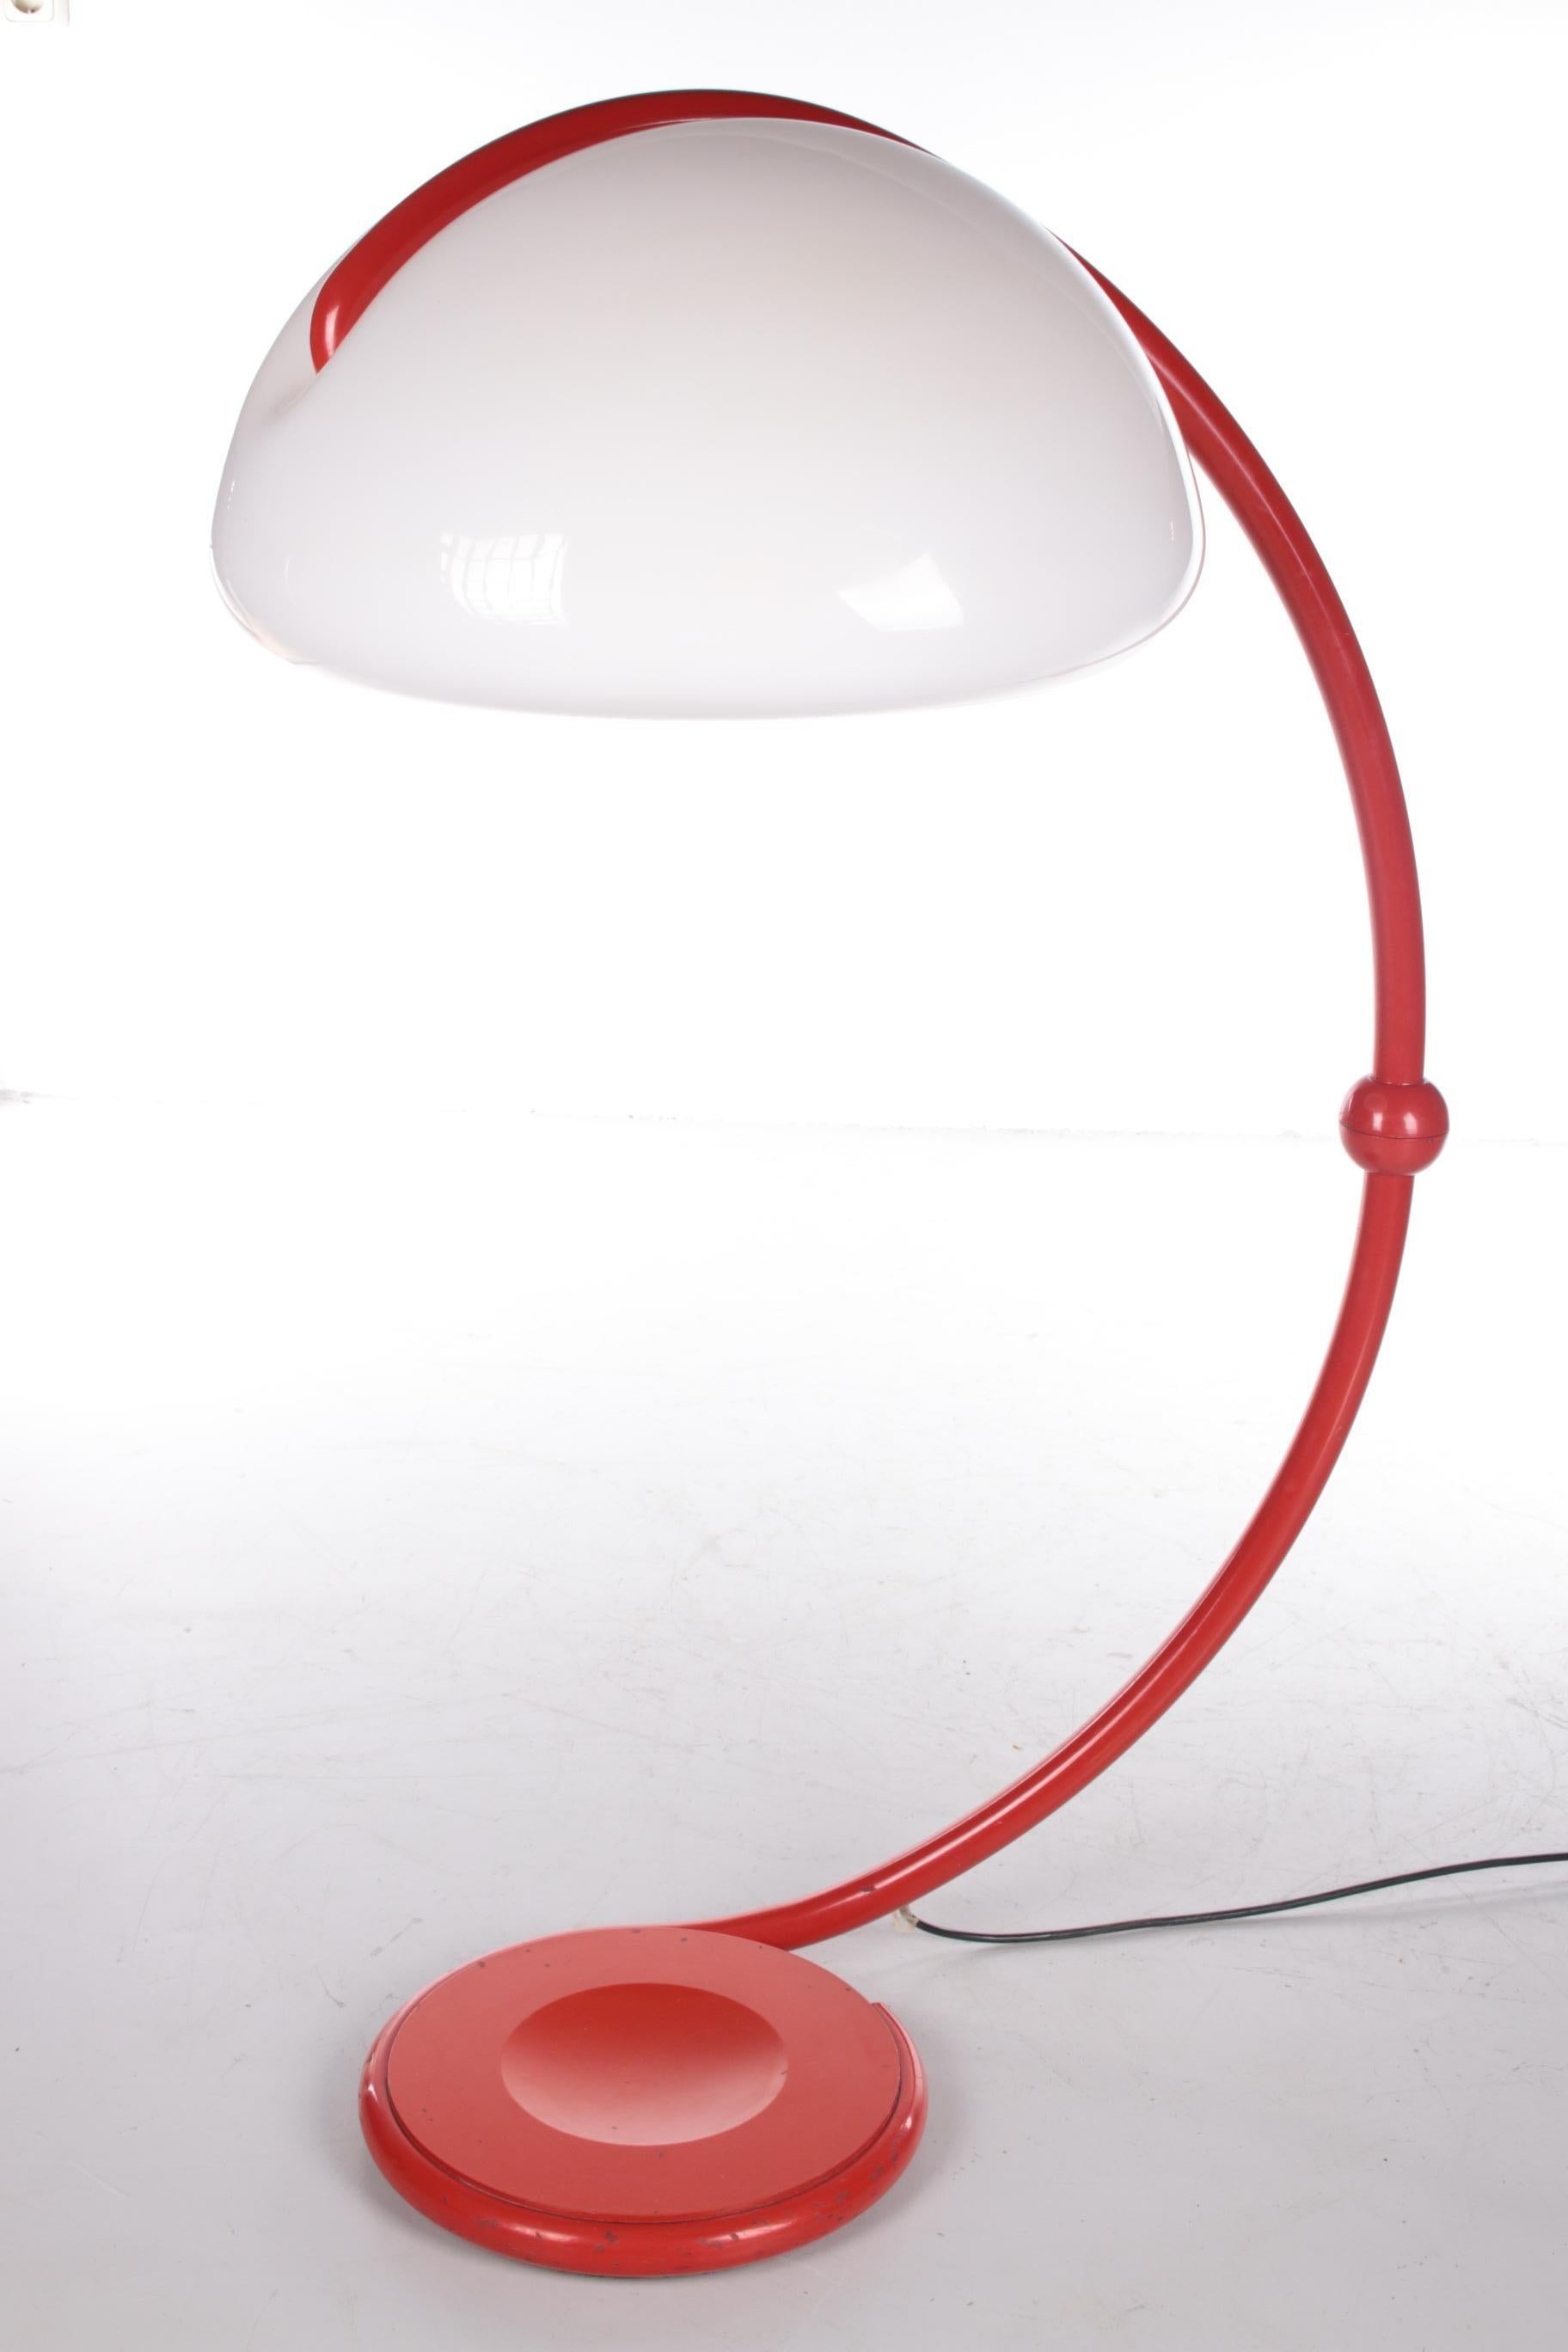 Floor lamp by Elio Martinelli for Martinelli Luce, 1960s


Beautiful iconic floor lamp by Elio Martinelli for the company Martinelli Luce.

This floor lamp is in very good to excellent condition.

This is model 2131

Some minor signs of age